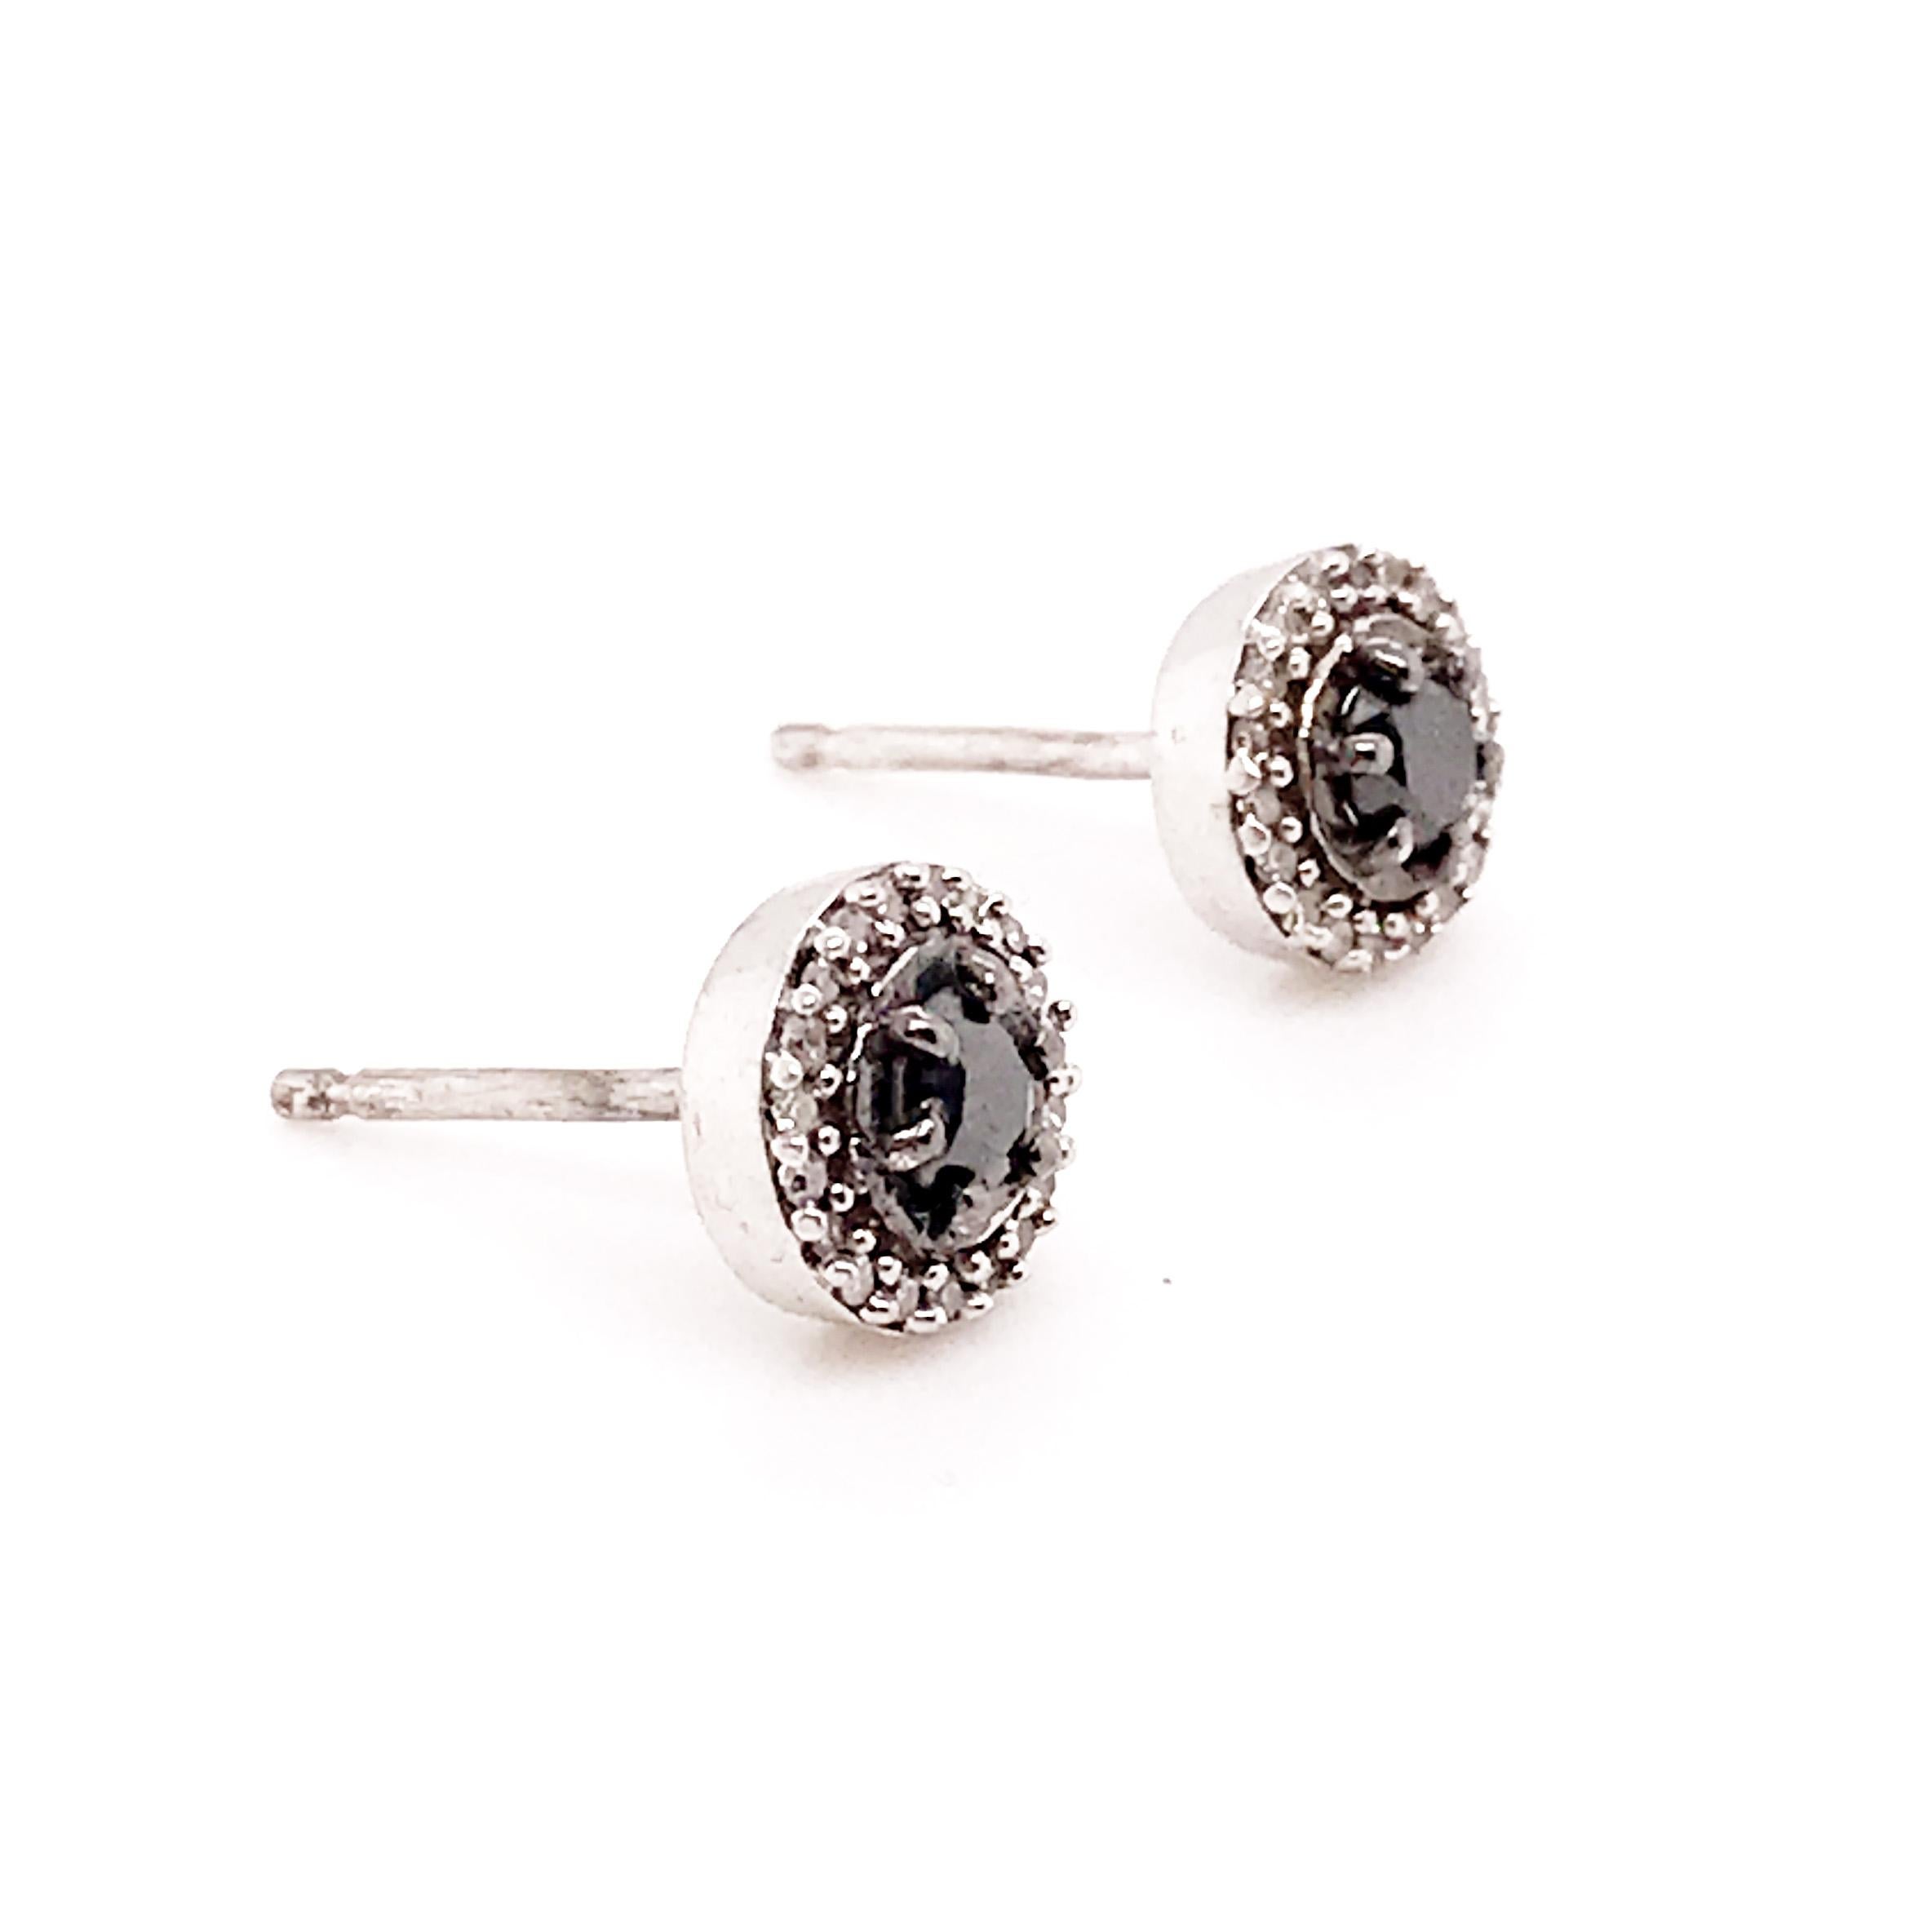 The .20 carat DIAMOND EARRING studs are a bold look with two genuine black diamonds set in the center. The black diamonds are rare and believed to be the toughest form of any natural diamond. These genuine, natural black diamonds are encased in a